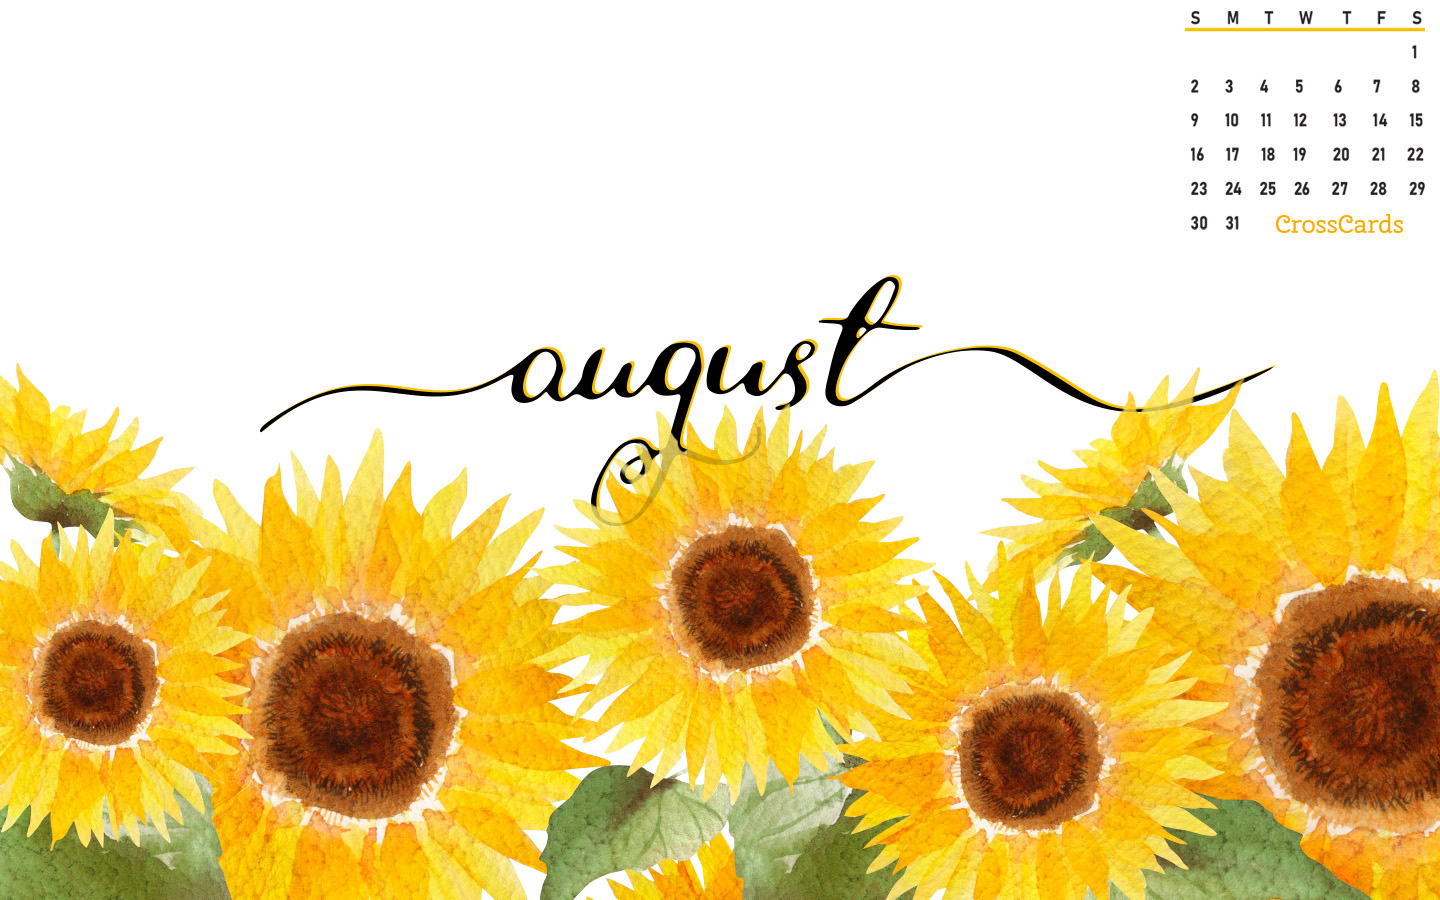 August 2020 - Sunflowers mobile phone wallpaper